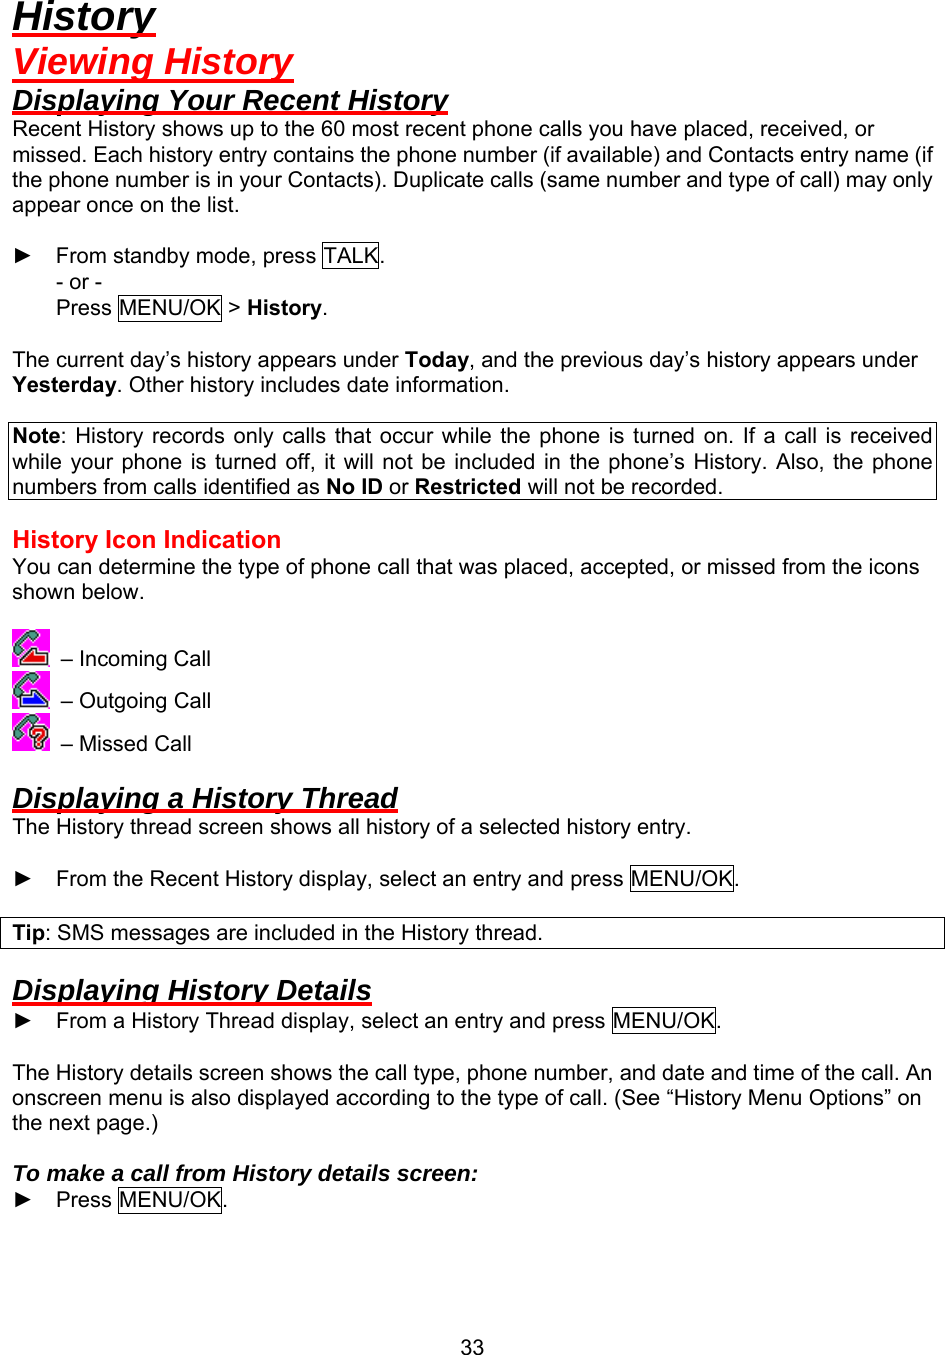  33History Viewing History Displaying Your Recent History Recent History shows up to the 60 most recent phone calls you have placed, received, or missed. Each history entry contains the phone number (if available) and Contacts entry name (if the phone number is in your Contacts). Duplicate calls (same number and type of call) may only appear once on the list.  ► From standby mode, press TALK. - or - Press MENU/OK &gt; History.  The current day’s history appears under Today, and the previous day’s history appears under Yesterday. Other history includes date information.  Note: History records only calls that occur while the phone is turned on. If a call is received while your phone is turned off, it will not be included in the phone’s History. Also, the phone numbers from calls identified as No ID or Restricted will not be recorded.  History Icon Indication You can determine the type of phone call that was placed, accepted, or missed from the icons shown below.   – Incoming Call  – Outgoing Call  – Missed Call  Displaying a History Thread The History thread screen shows all history of a selected history entry.  ► From the Recent History display, select an entry and press MENU/OK.  Tip: SMS messages are included in the History thread.  Displaying History Details ► From a History Thread display, select an entry and press MENU/OK.  The History details screen shows the call type, phone number, and date and time of the call. An onscreen menu is also displayed according to the type of call. (See “History Menu Options” on the next page.)  To make a call from History details screen: ► Press MENU/OK.  